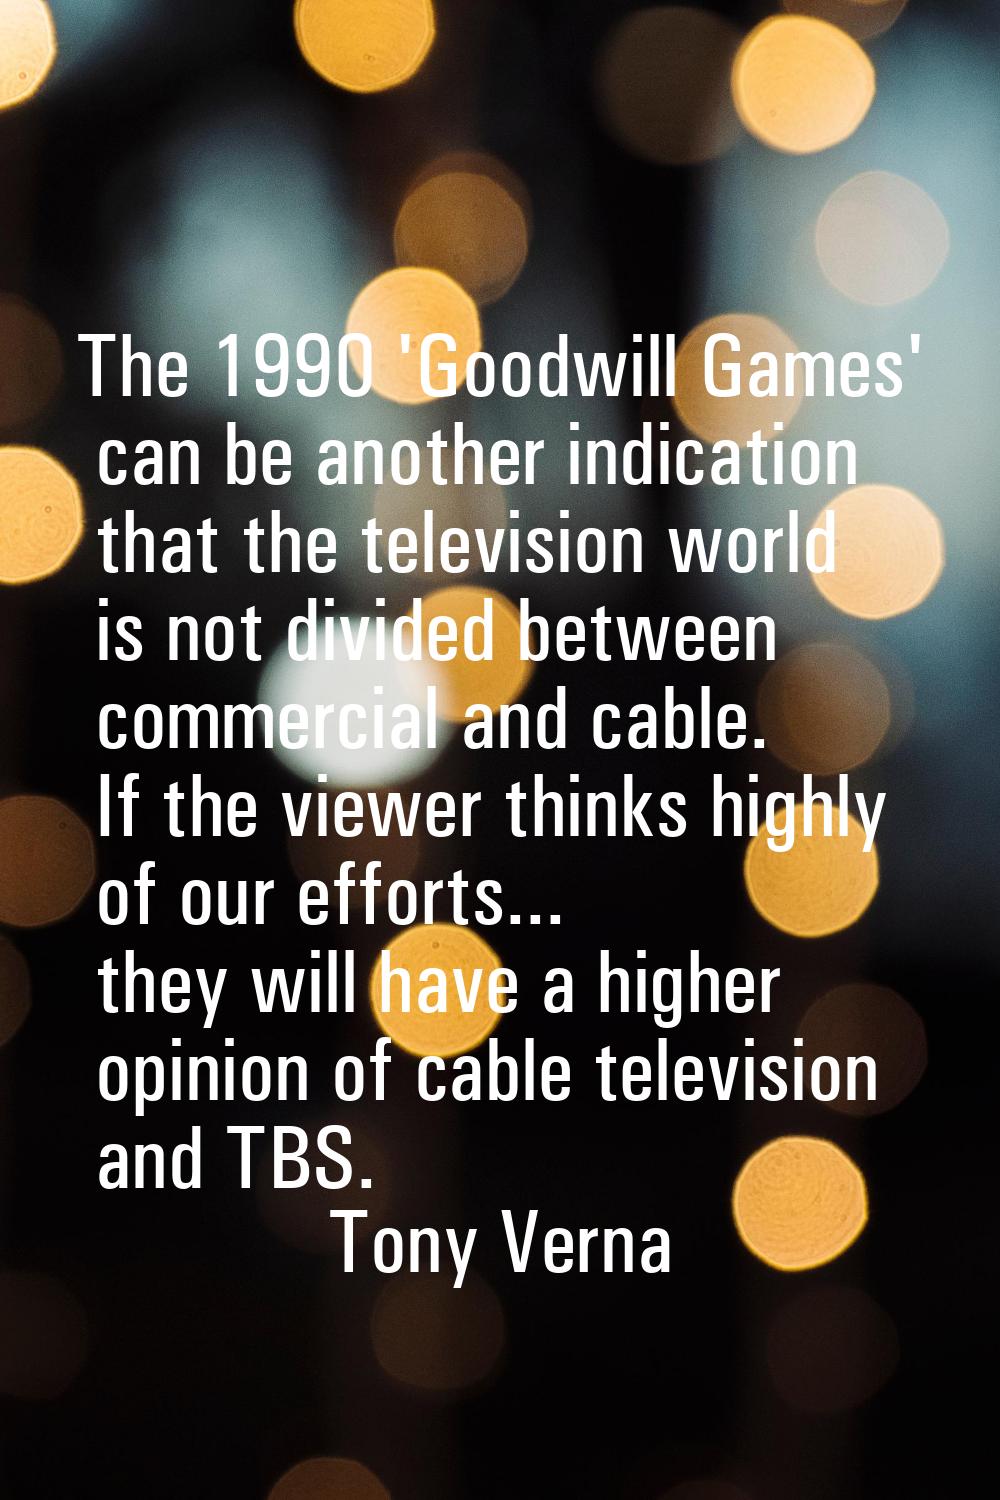 The 1990 'Goodwill Games' can be another indication that the television world is not divided betwee